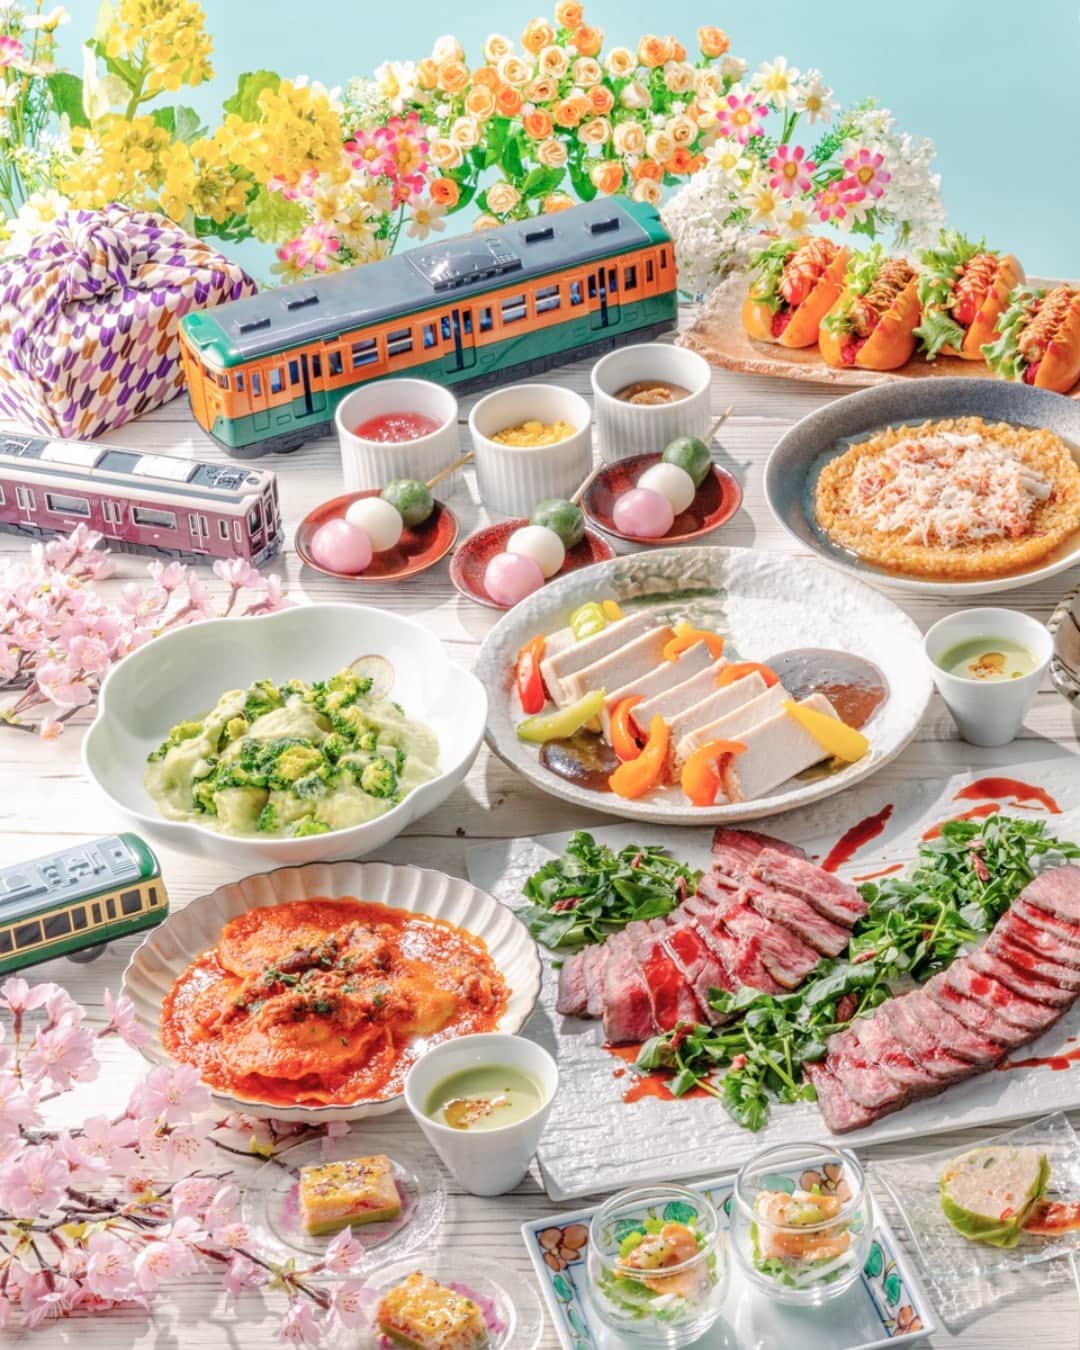 Hilton Tokyo Odaiba ヒルトン東京お台場のインスタグラム：「春の日本列島を旅するように味わい尽くす！『ハルイロ紀行』🍓 ～ランチ＆ディナービュッフェ with ストロベリースイーツ～  春めく料理やムードフード、旬のいちごのスイーツに舌鼓を打つ、優雅な時間をどうぞお楽しみください。  詳細はホテル公式サイトをご確認ください。  Embark on a culinary journey across Japan this spring!  Treat yourself to an exquisite dining experience that includes seasonal dishes, mood-boosting foods, and decadent strawberry sweets🍰 Let the flavors of "Haruiro Journey" transport you throughout the Japanese archipelago with every savory bite.  #ヒルトン東京お台場 #hiltontokyoodaiba」